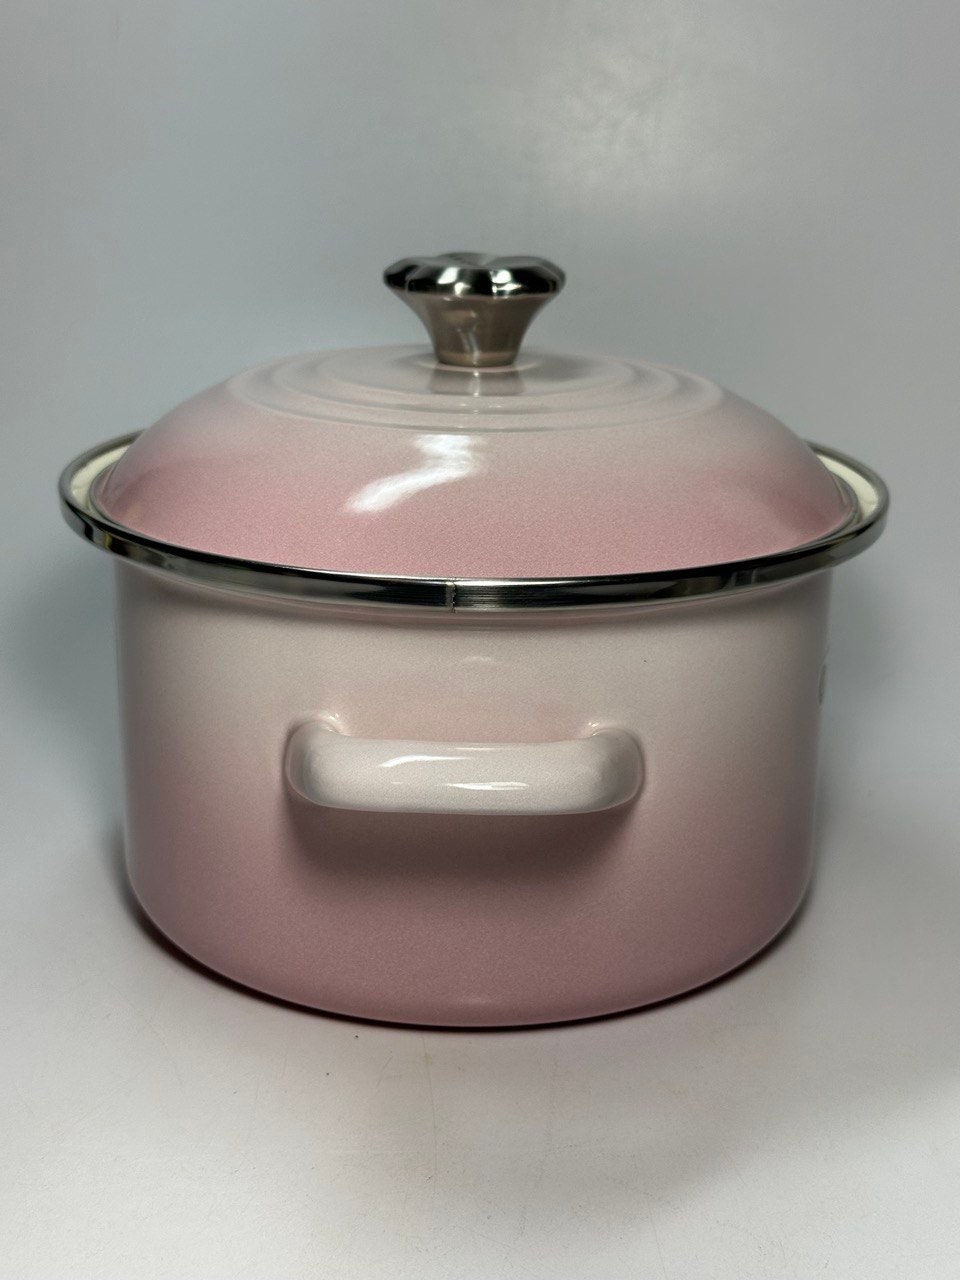 Lexi Home Seashell Pink Cast Iron Enameled Dutch Oven Pot - $29.99 - Free  shipping for Prime members